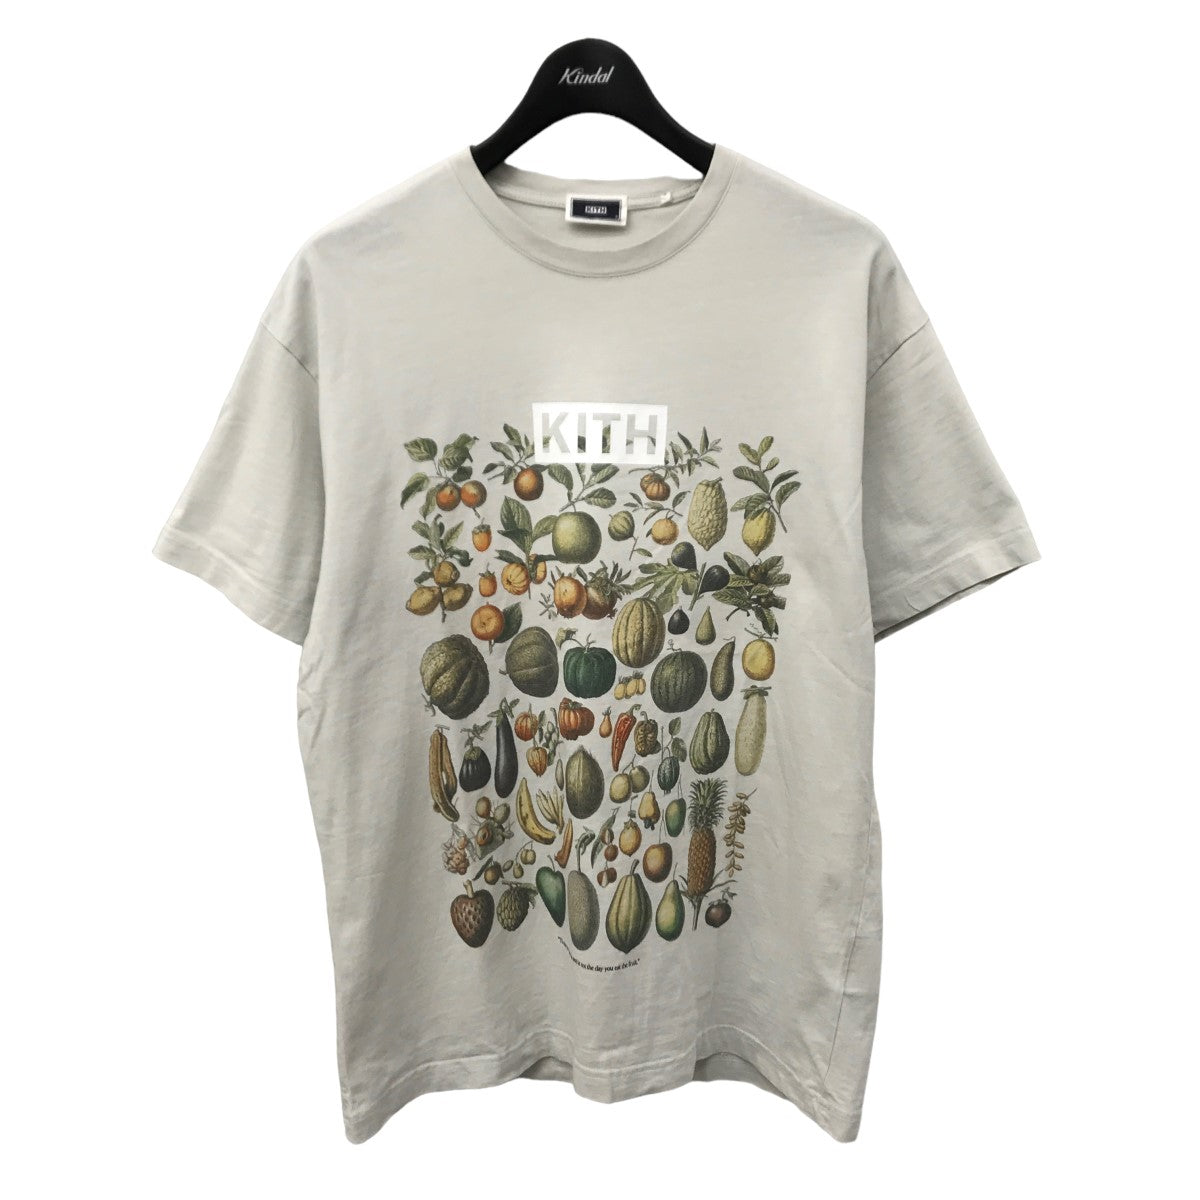 KITH(キス) 22SS Growth in Time Vintage Tee プリントTシャツ